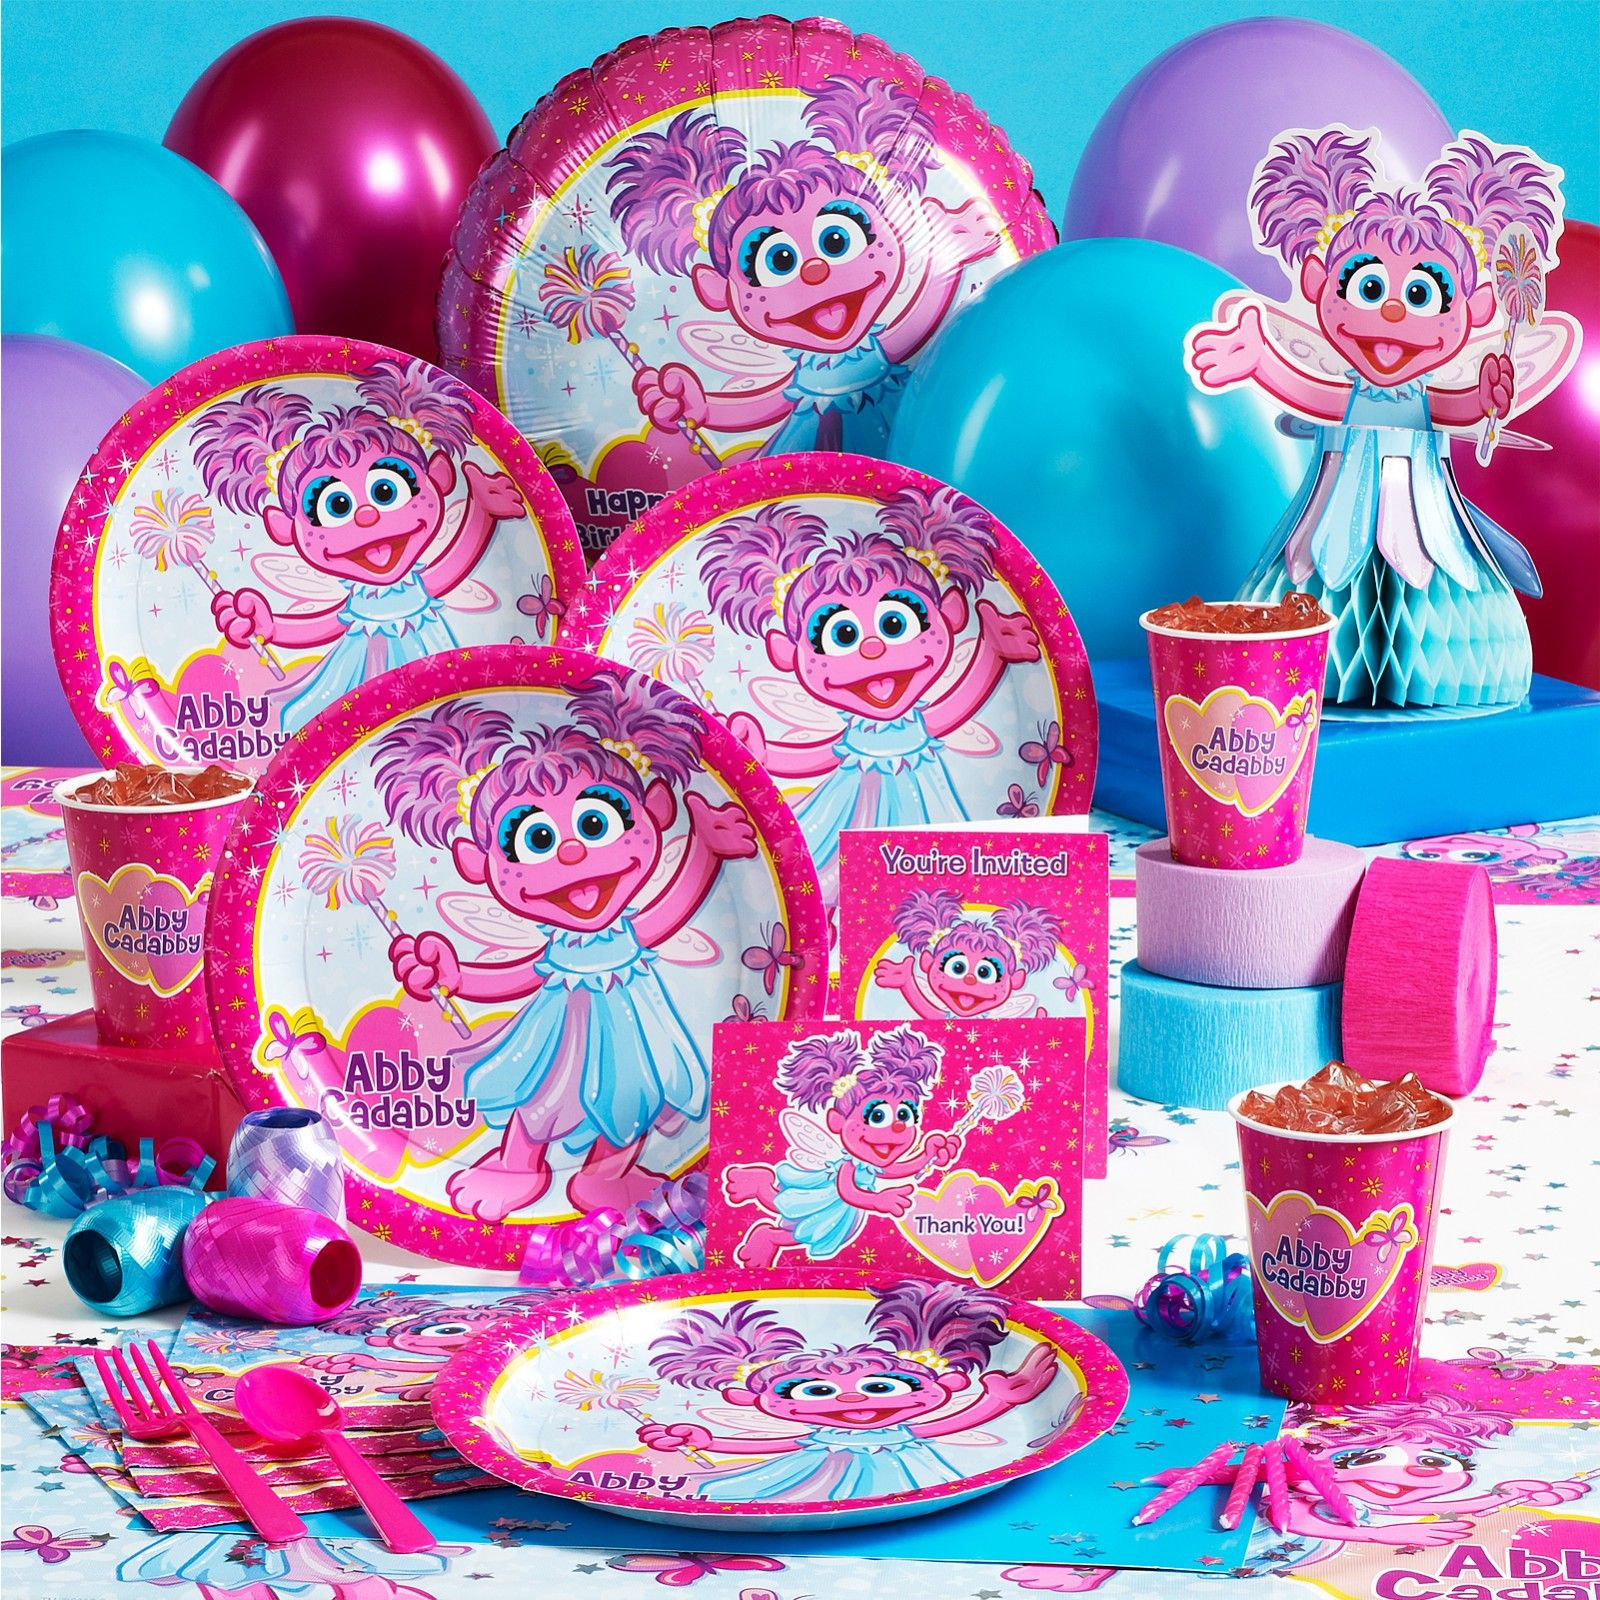 Sesame Street 1st Birthday Party Supplies
 Abby Cadabby Party Supplies Pairs well with Elmo and